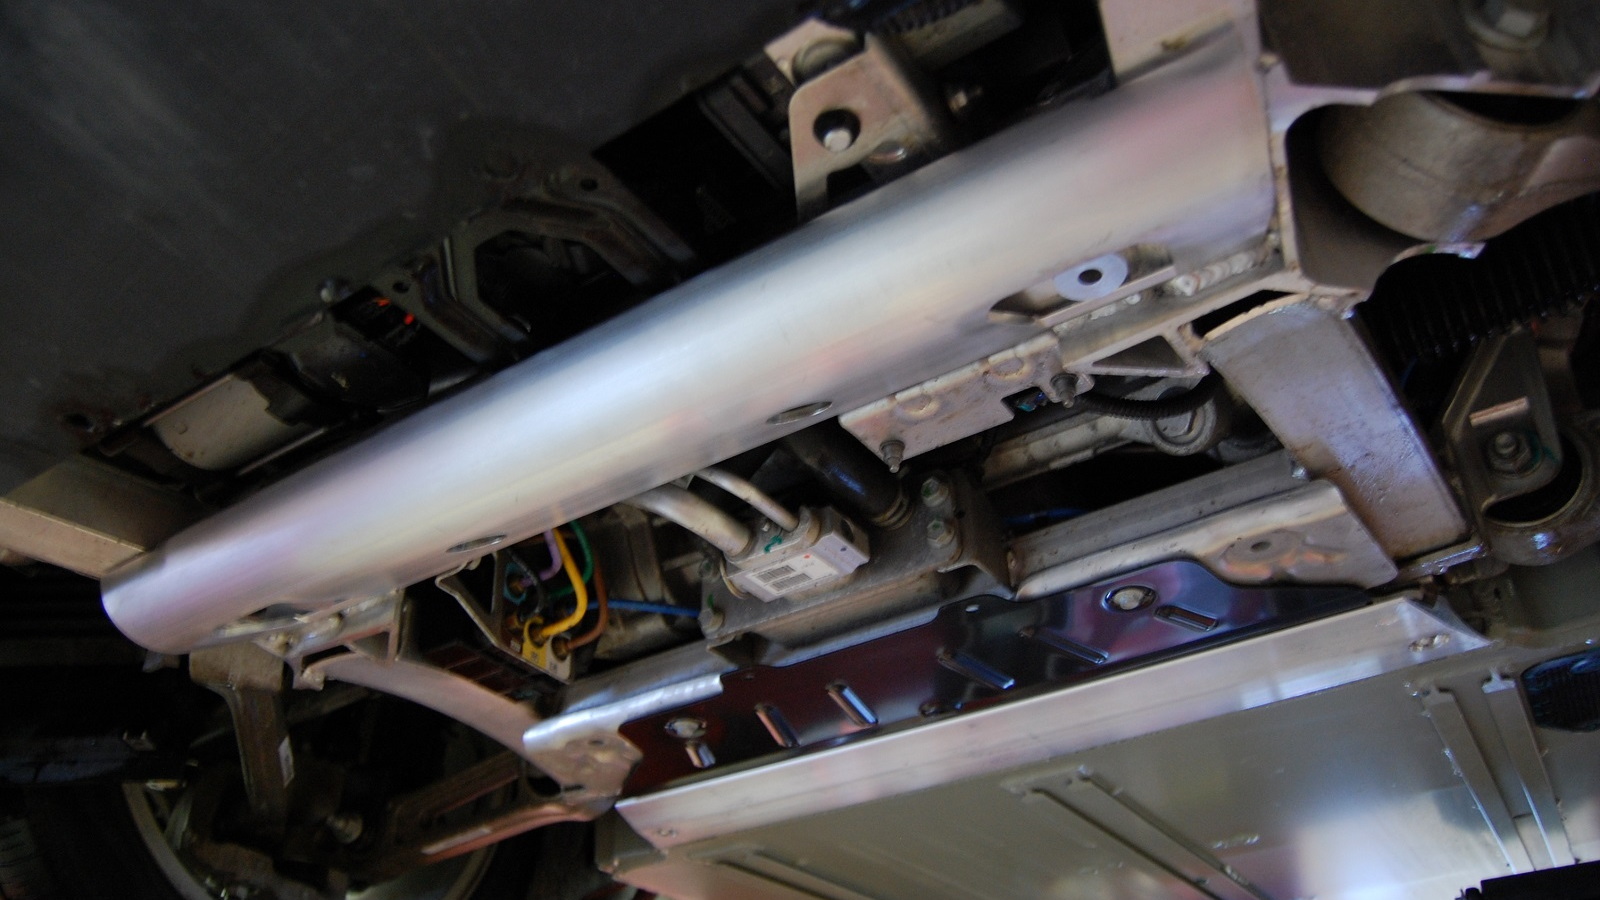 Tesla Model S added battery shield - half-tube, black titanium plate, T-section, from front to rear